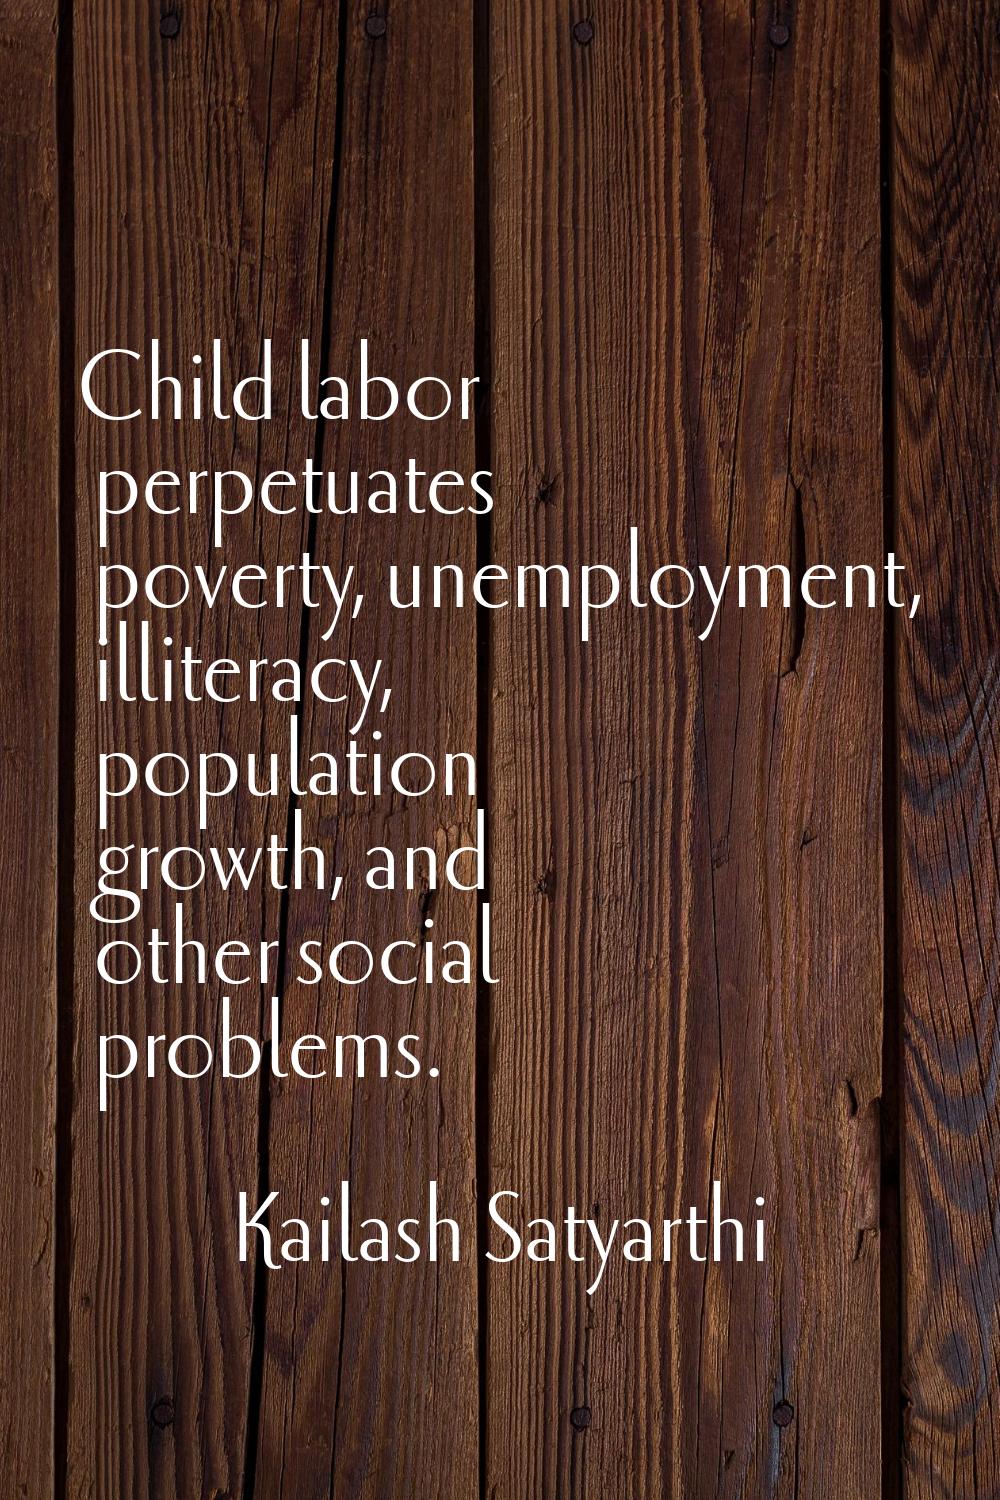 Child labor perpetuates poverty, unemployment, illiteracy, population growth, and other social prob